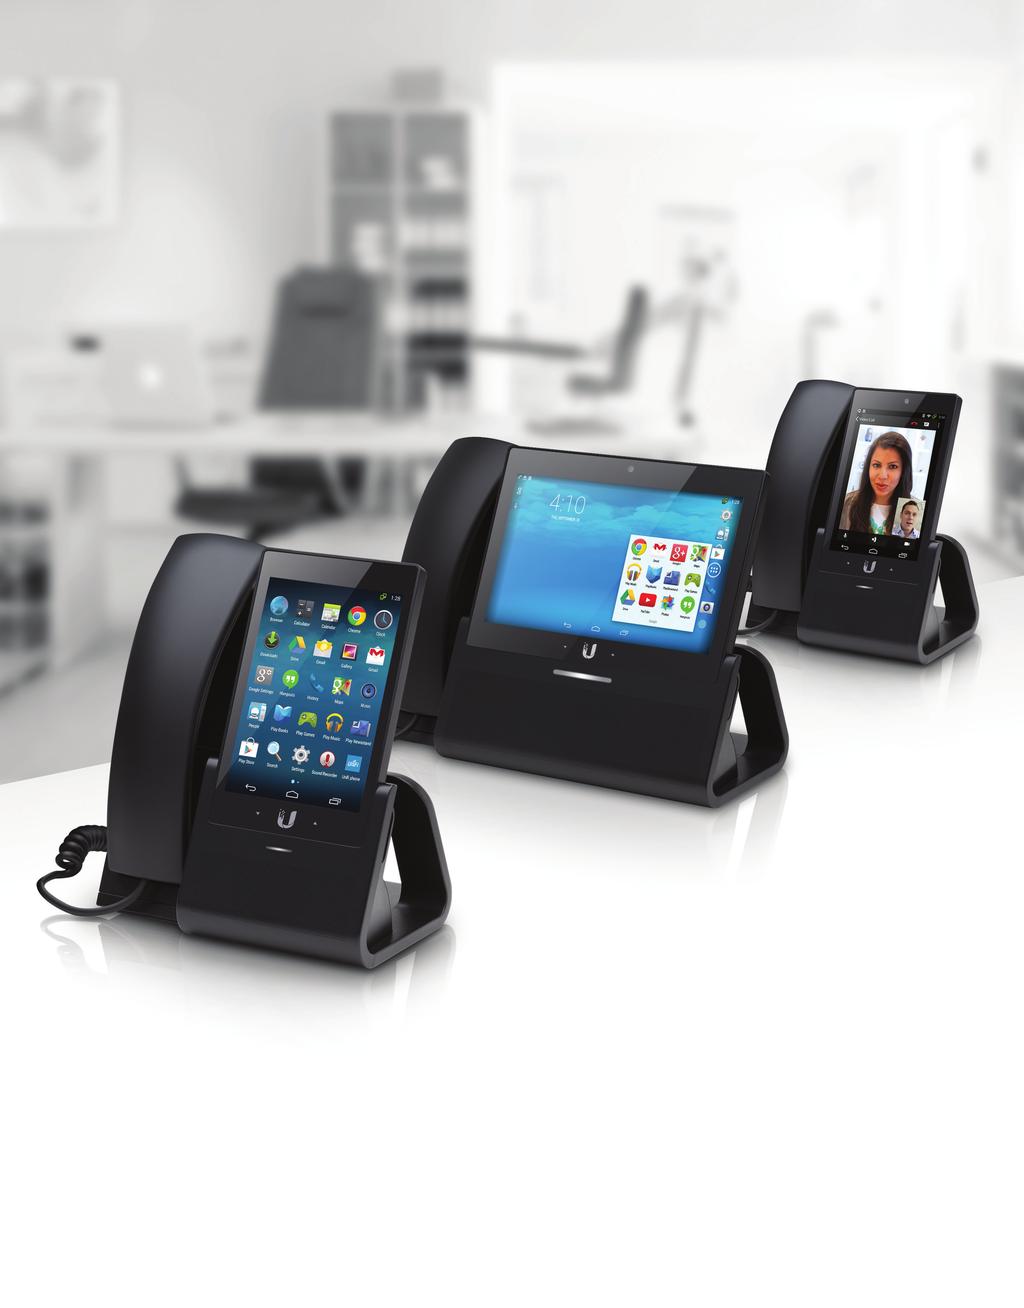 Enterprise VoIP Phone with